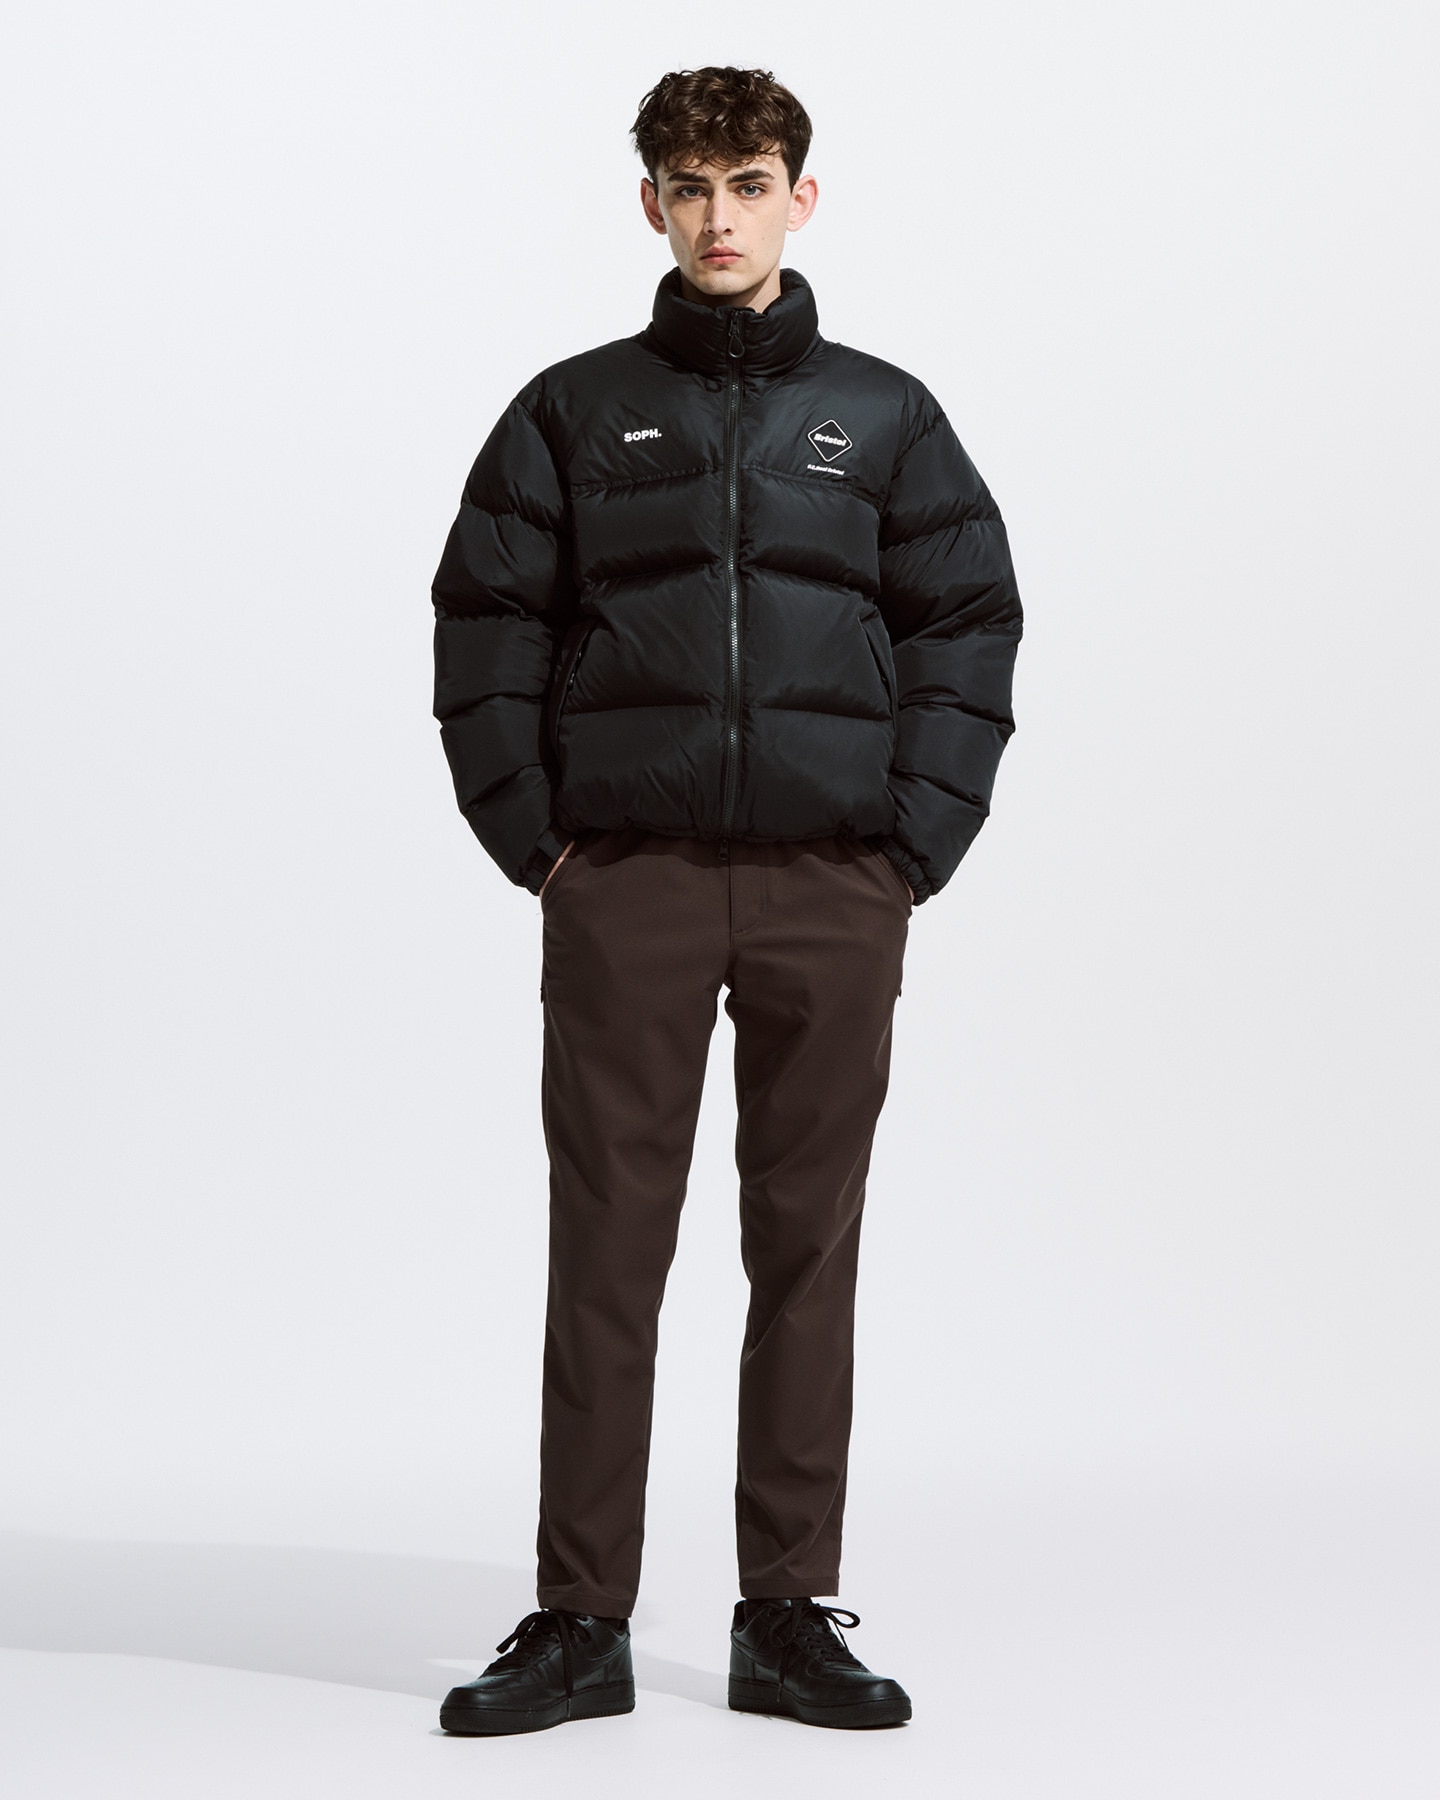 FCRB STAND COLLAR DOWN JACKET Bristolneighbo